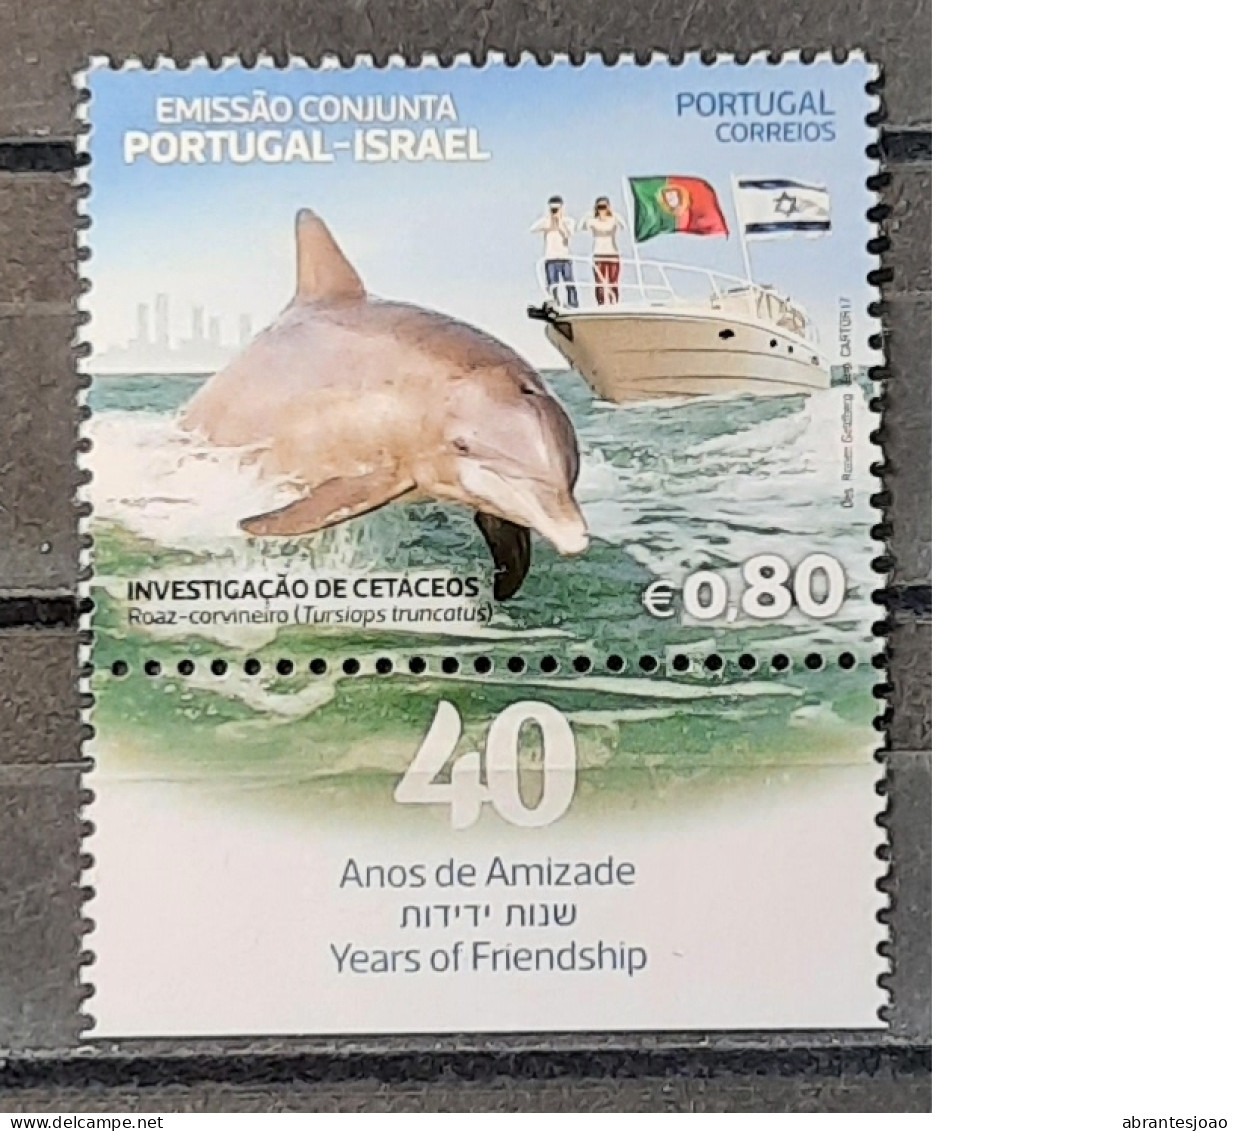 2017 - Portugal - MNH - Joint With Israel -40 Years Of Friendship - Dolphins - 2 Stamps - Ungebraucht